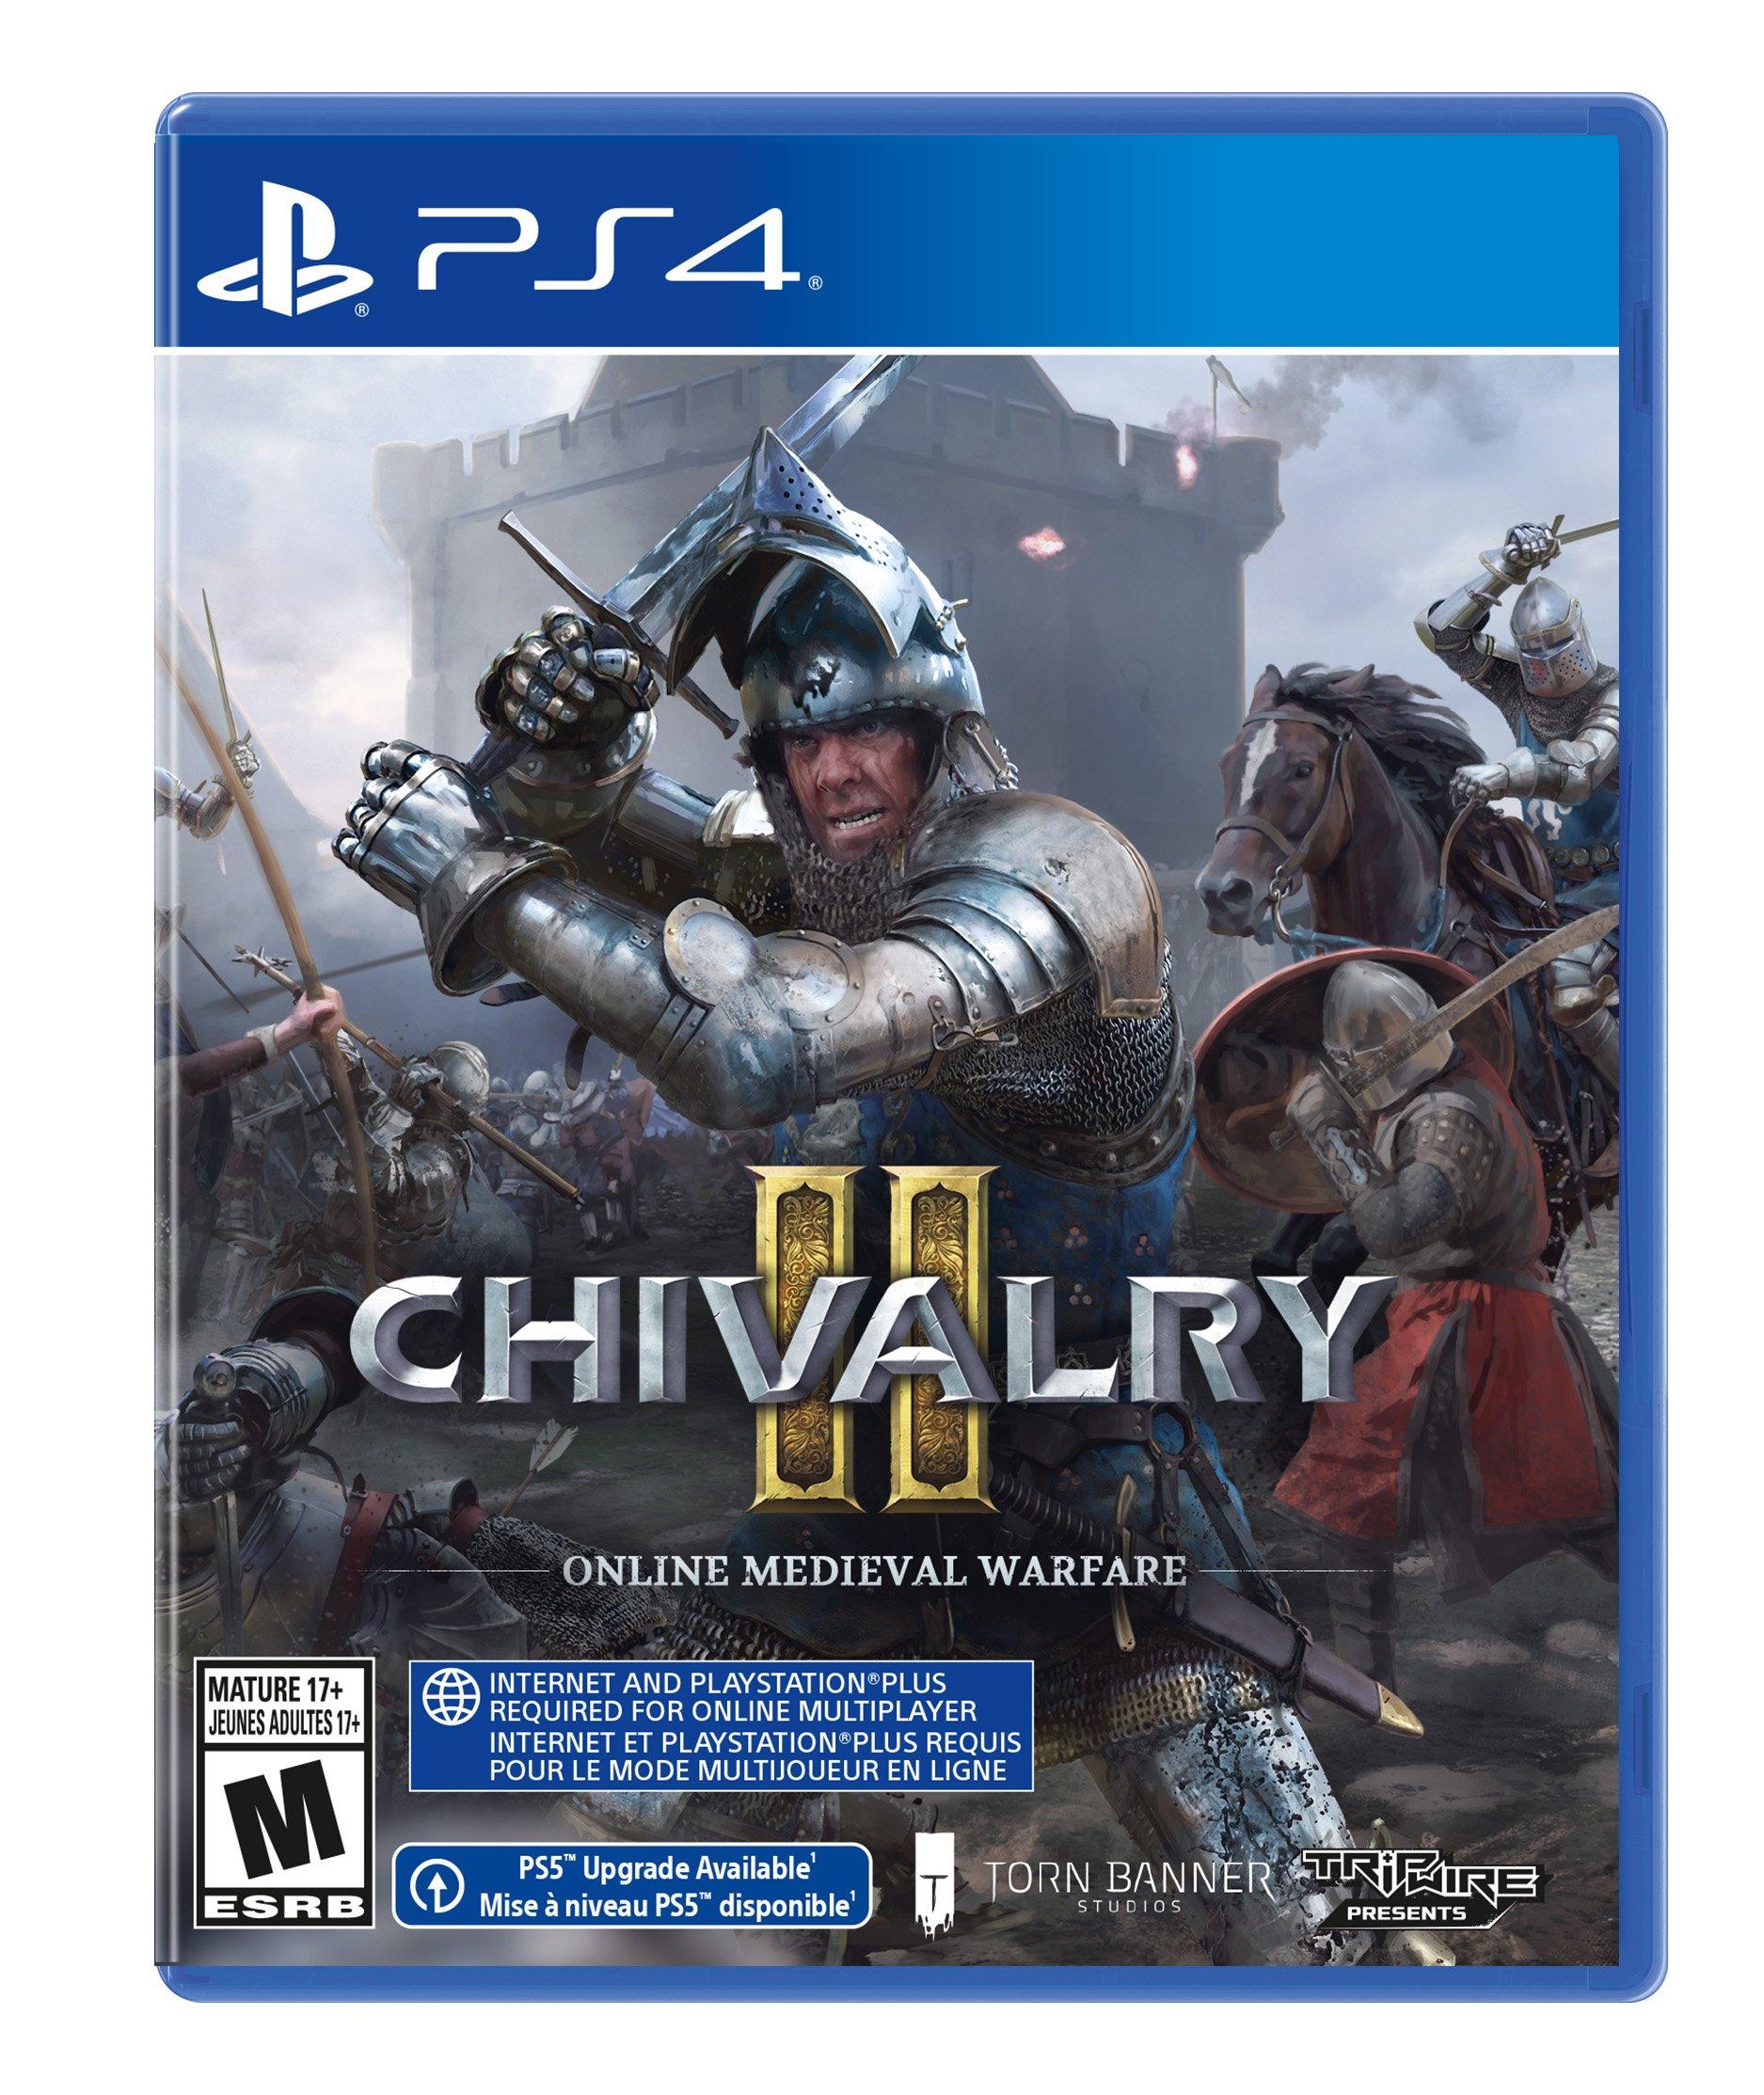 33+ Where to buy chivalry 2 information